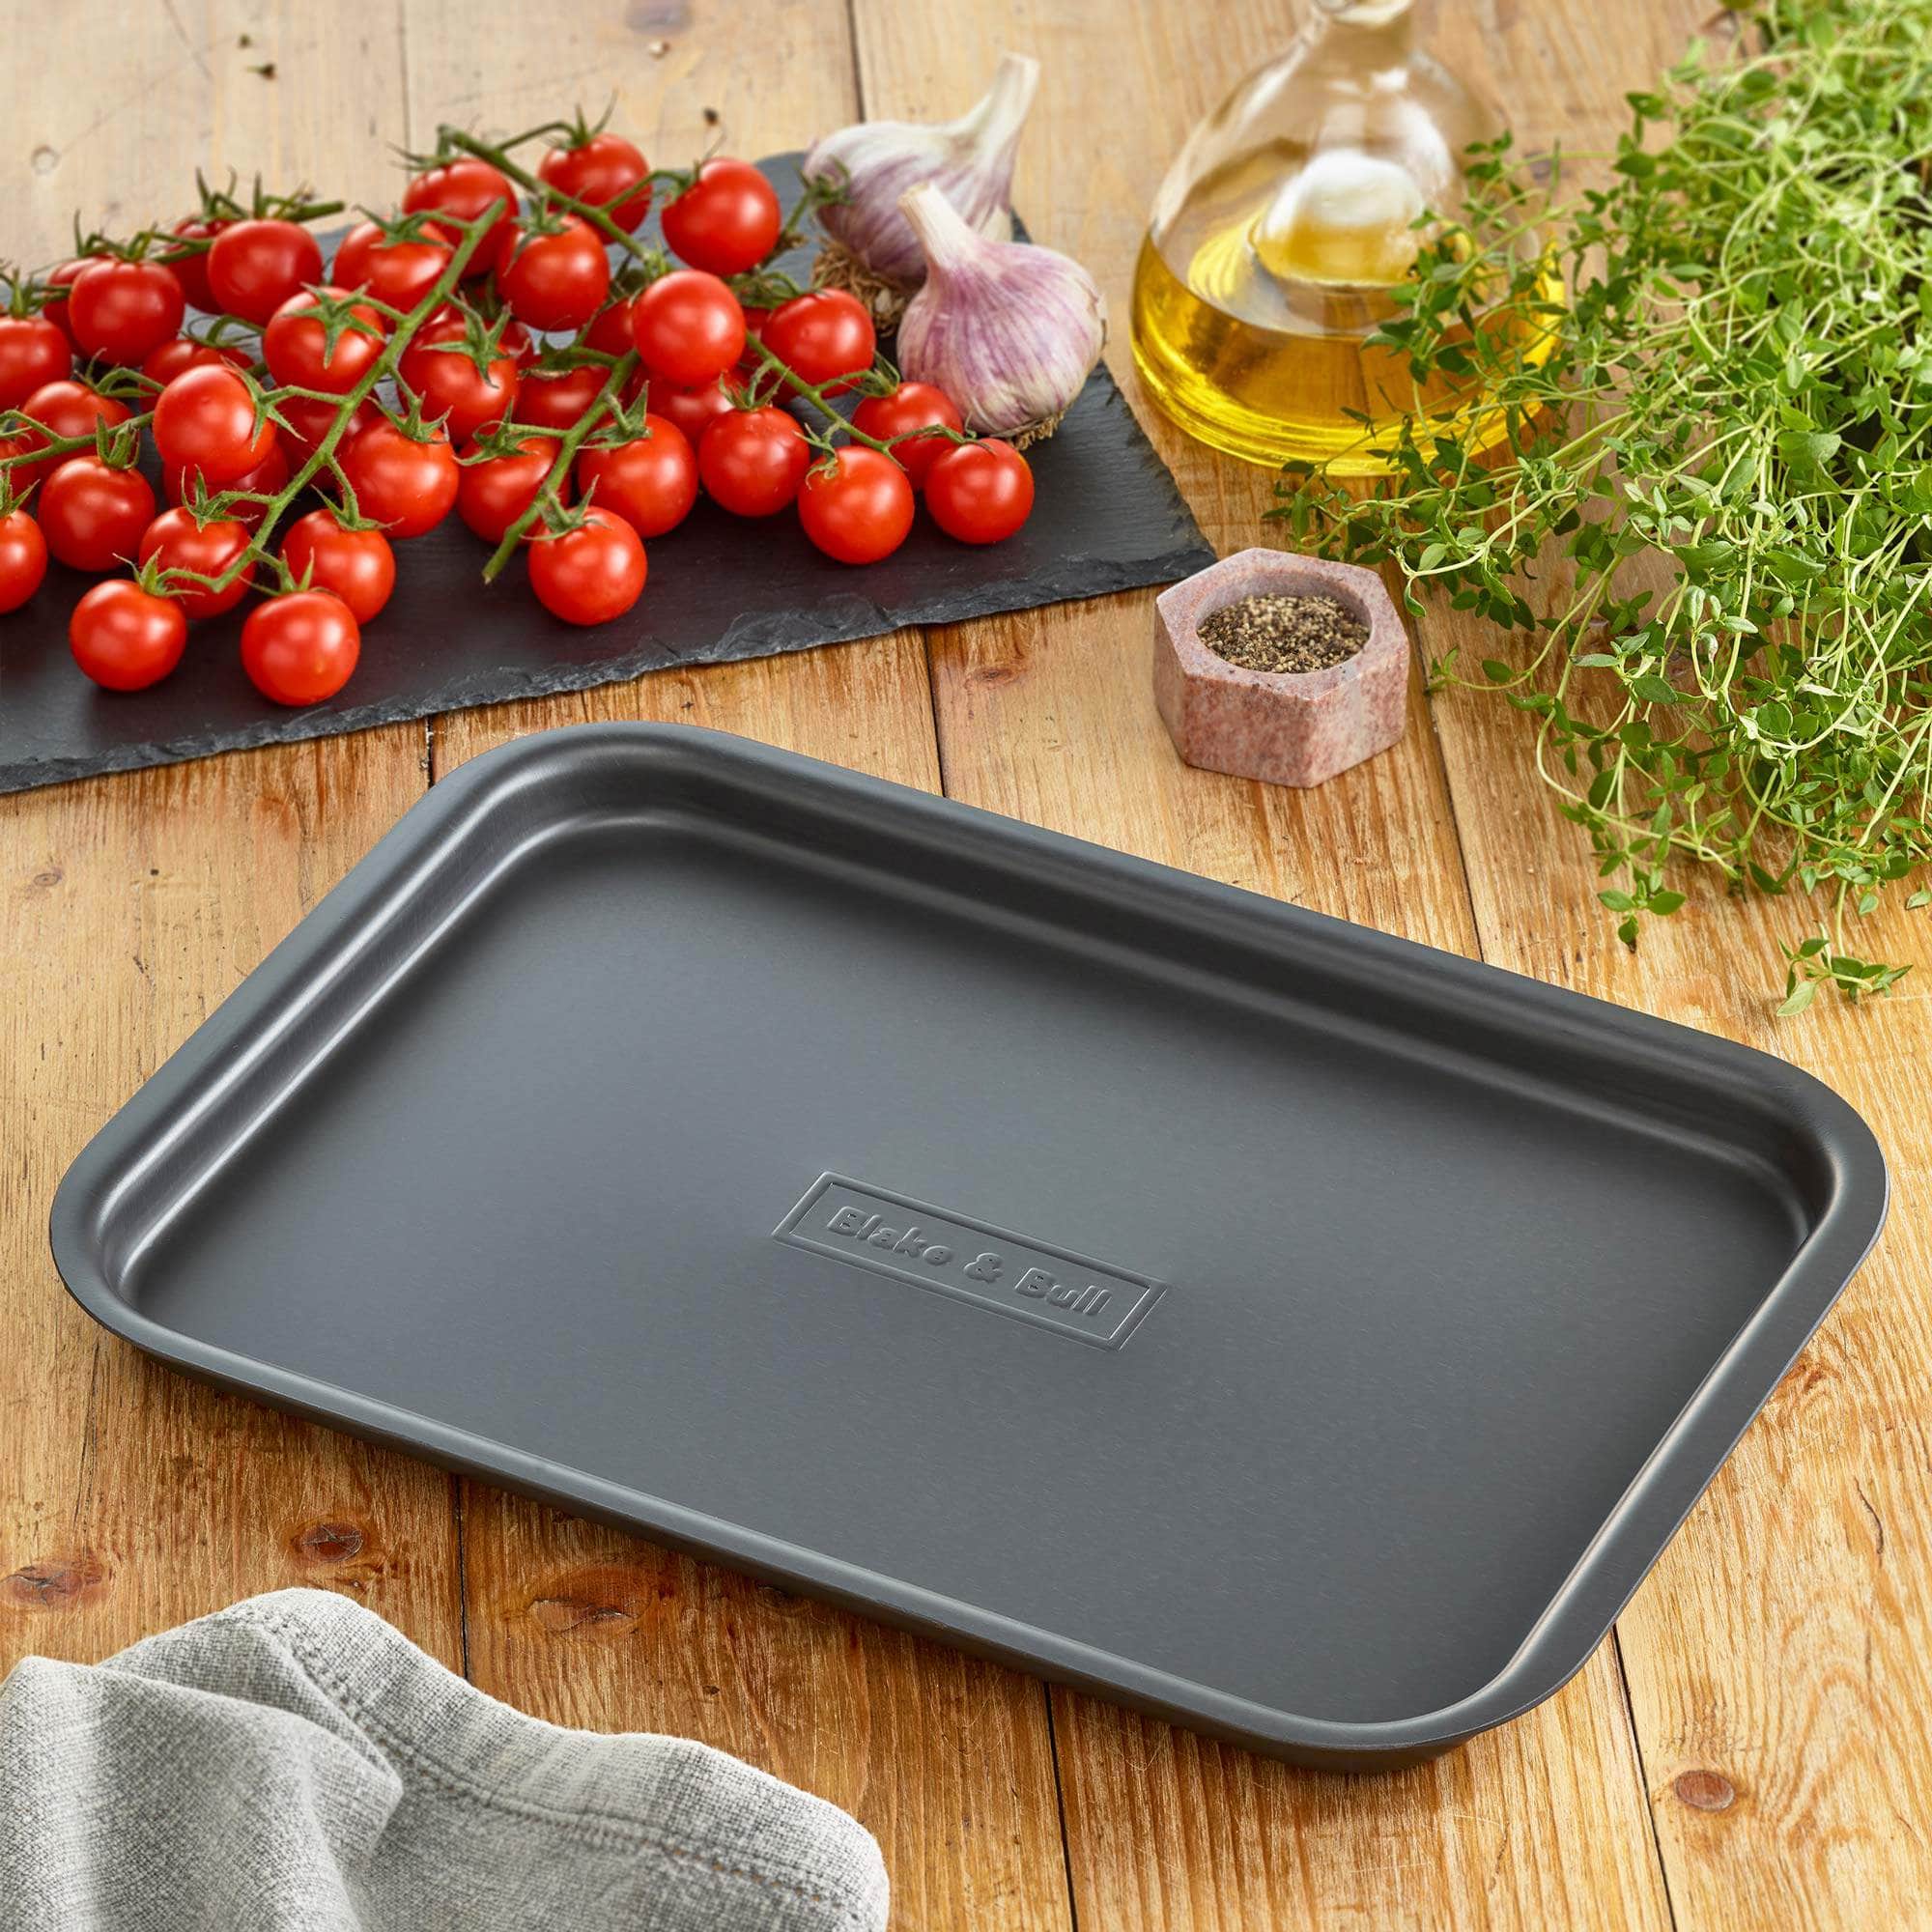 'Fits on runners' baking tray for use with Aga range cookers 'half oven' size